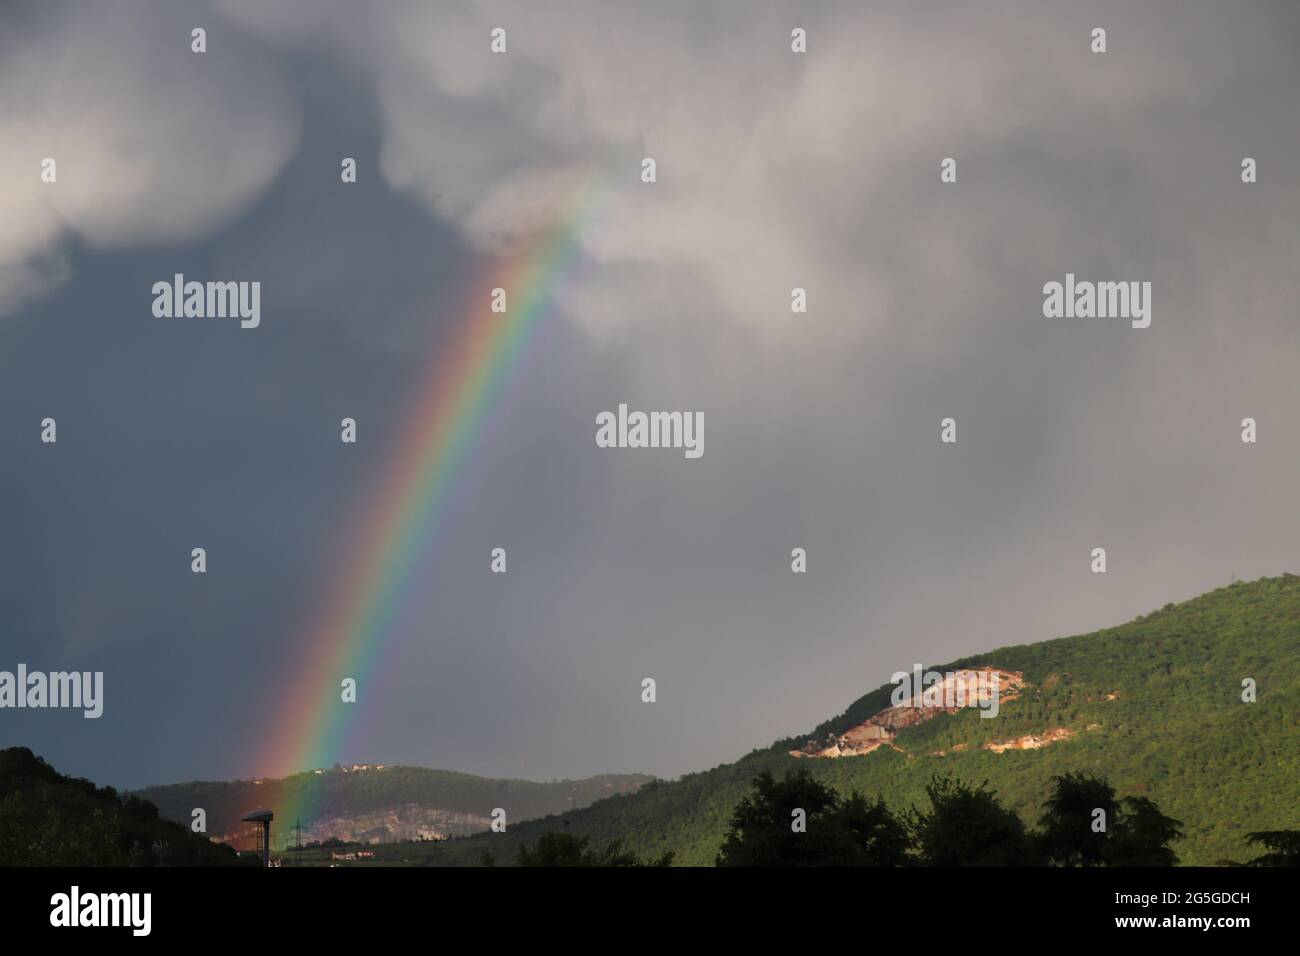 After the rain and a colorful Rainbow in the background of the countryside. Rainbow rural landscape Stock Photo